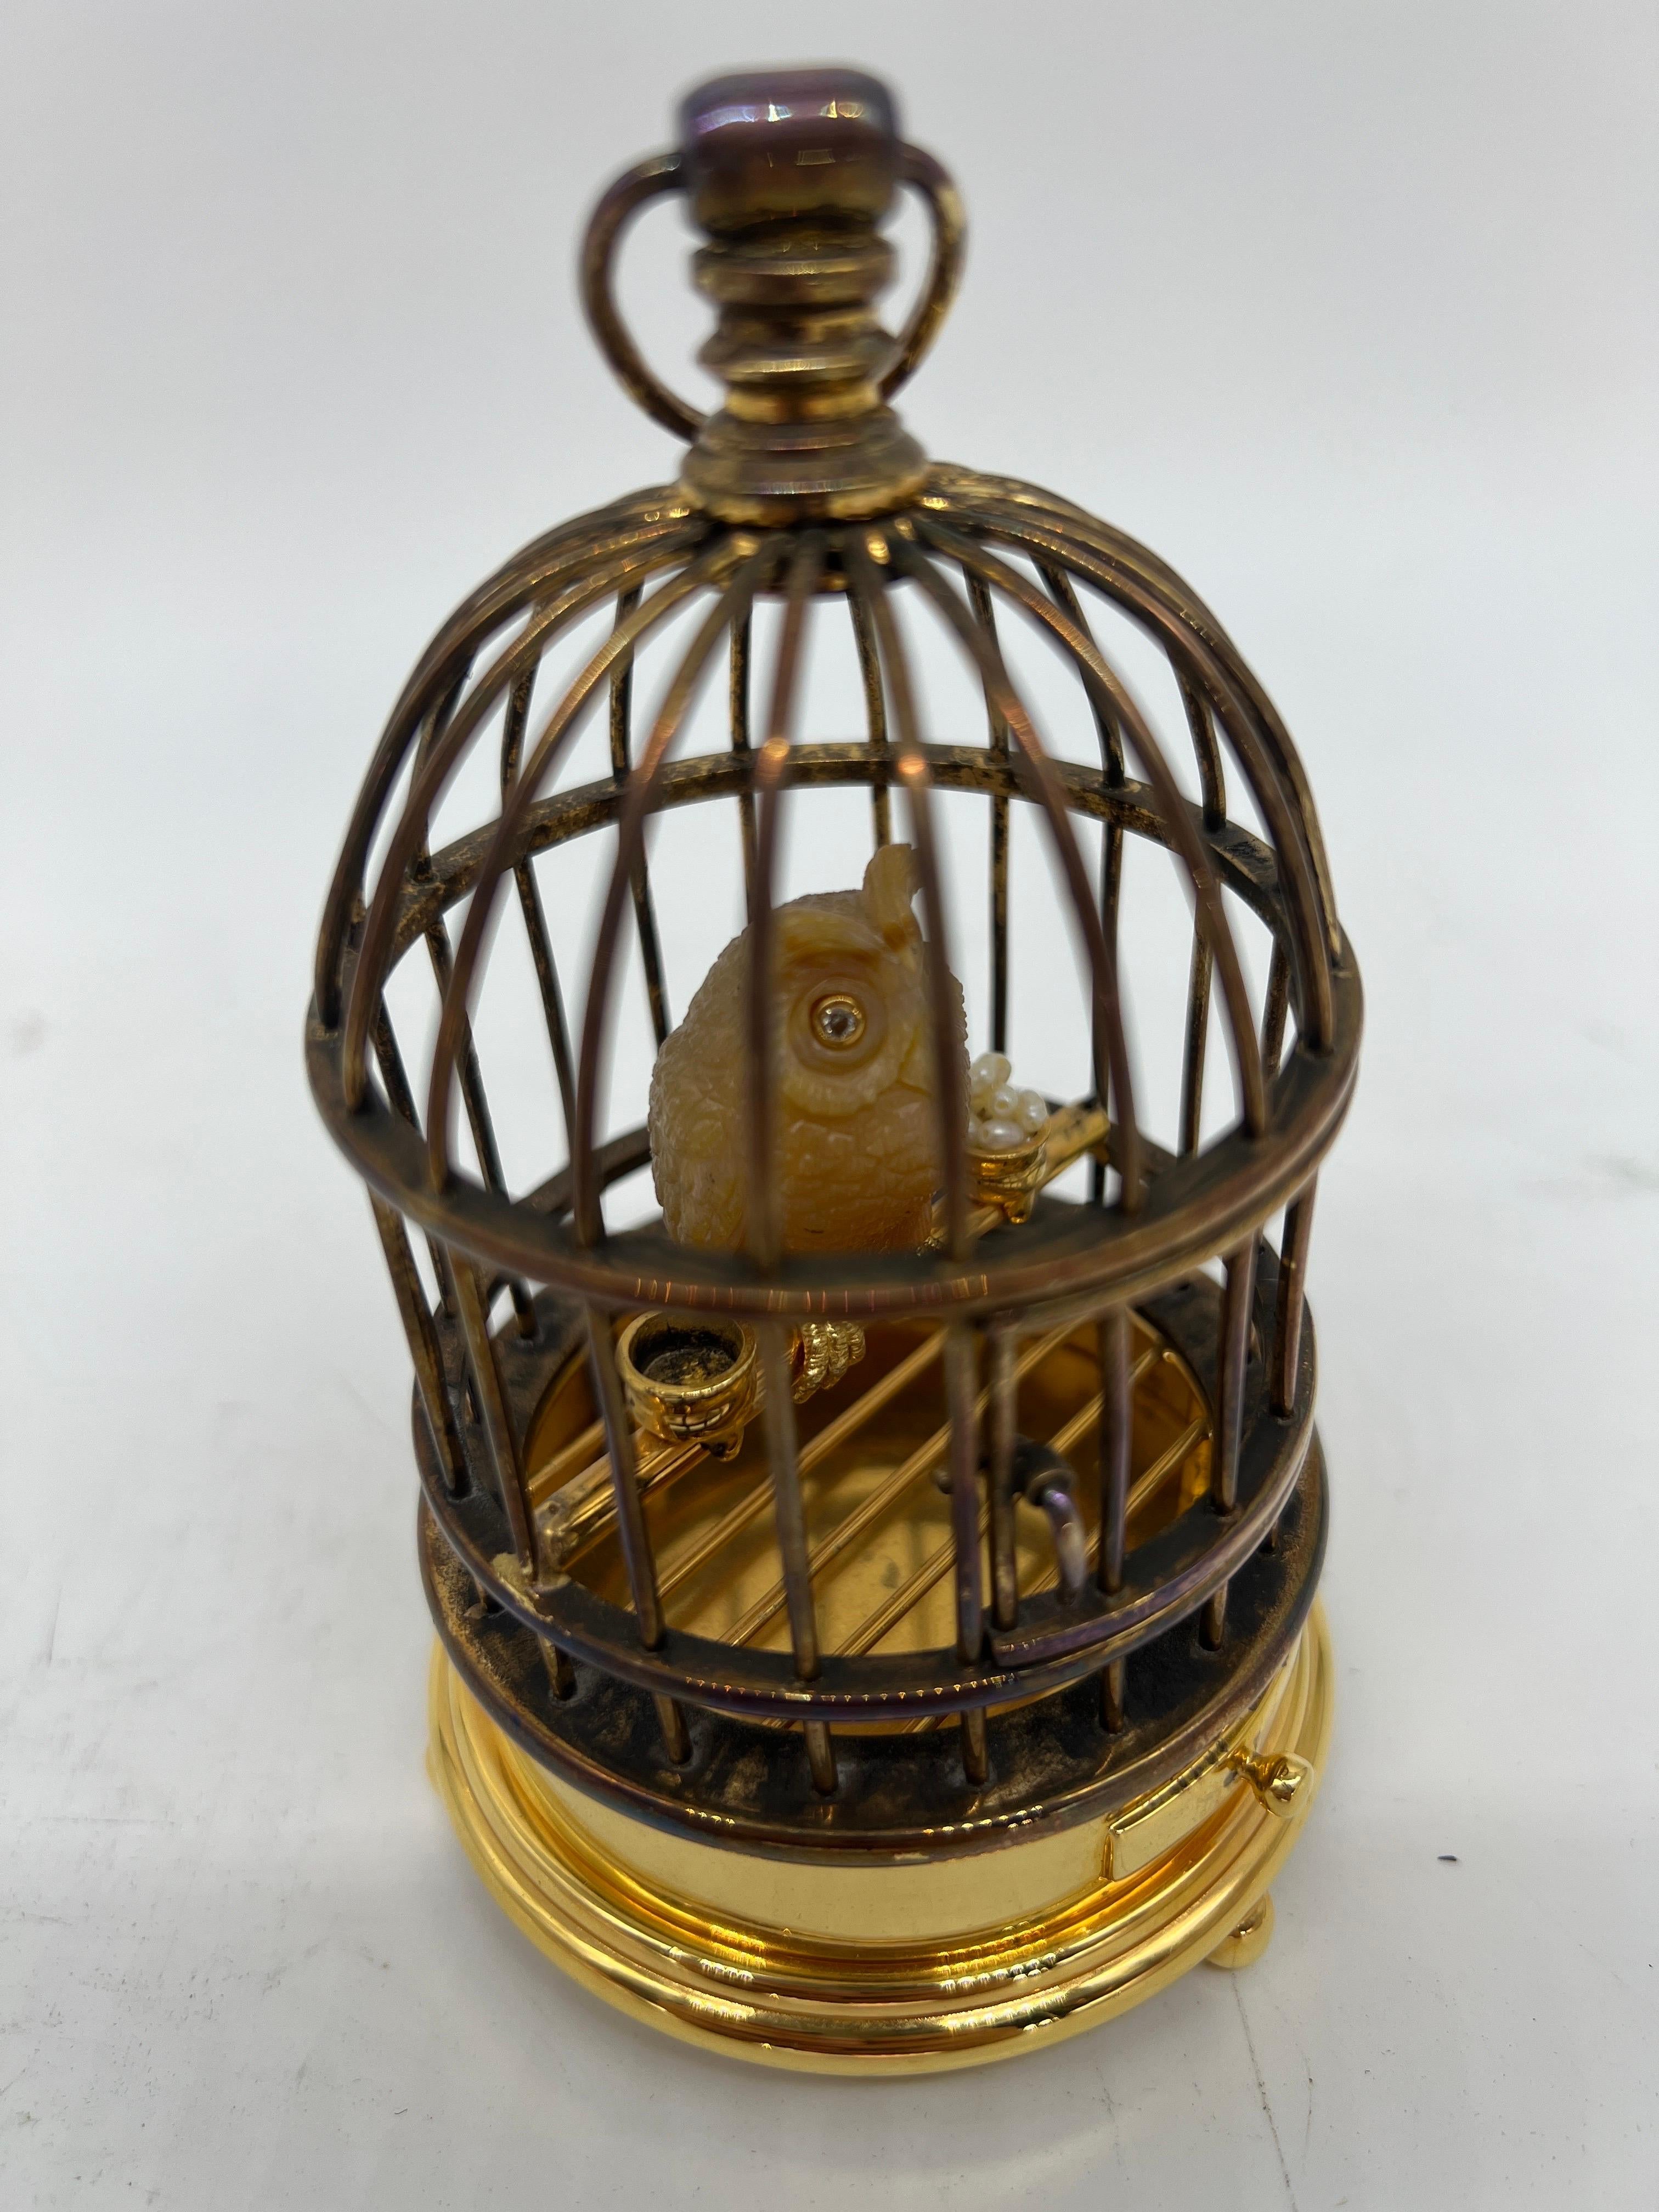 Faberge, Jeweled and Silver-Gilt Model of an Owl in a Cage Diamond & Sterling For Sale 1